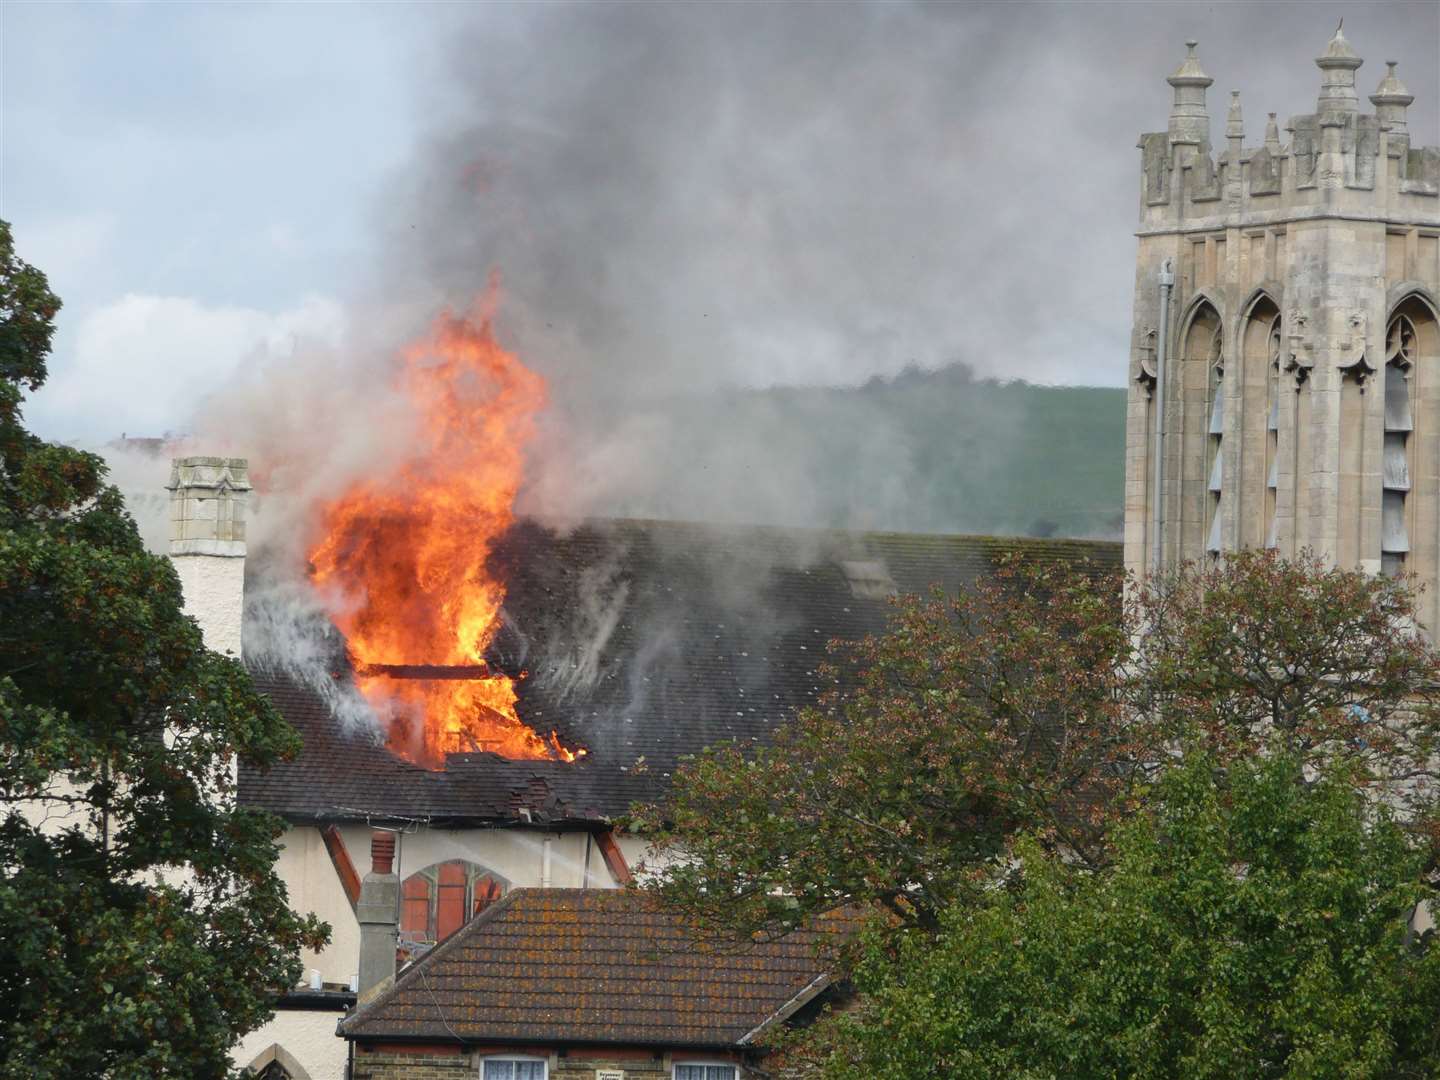 The church on fire, 2007 Picture:.Alison Williams